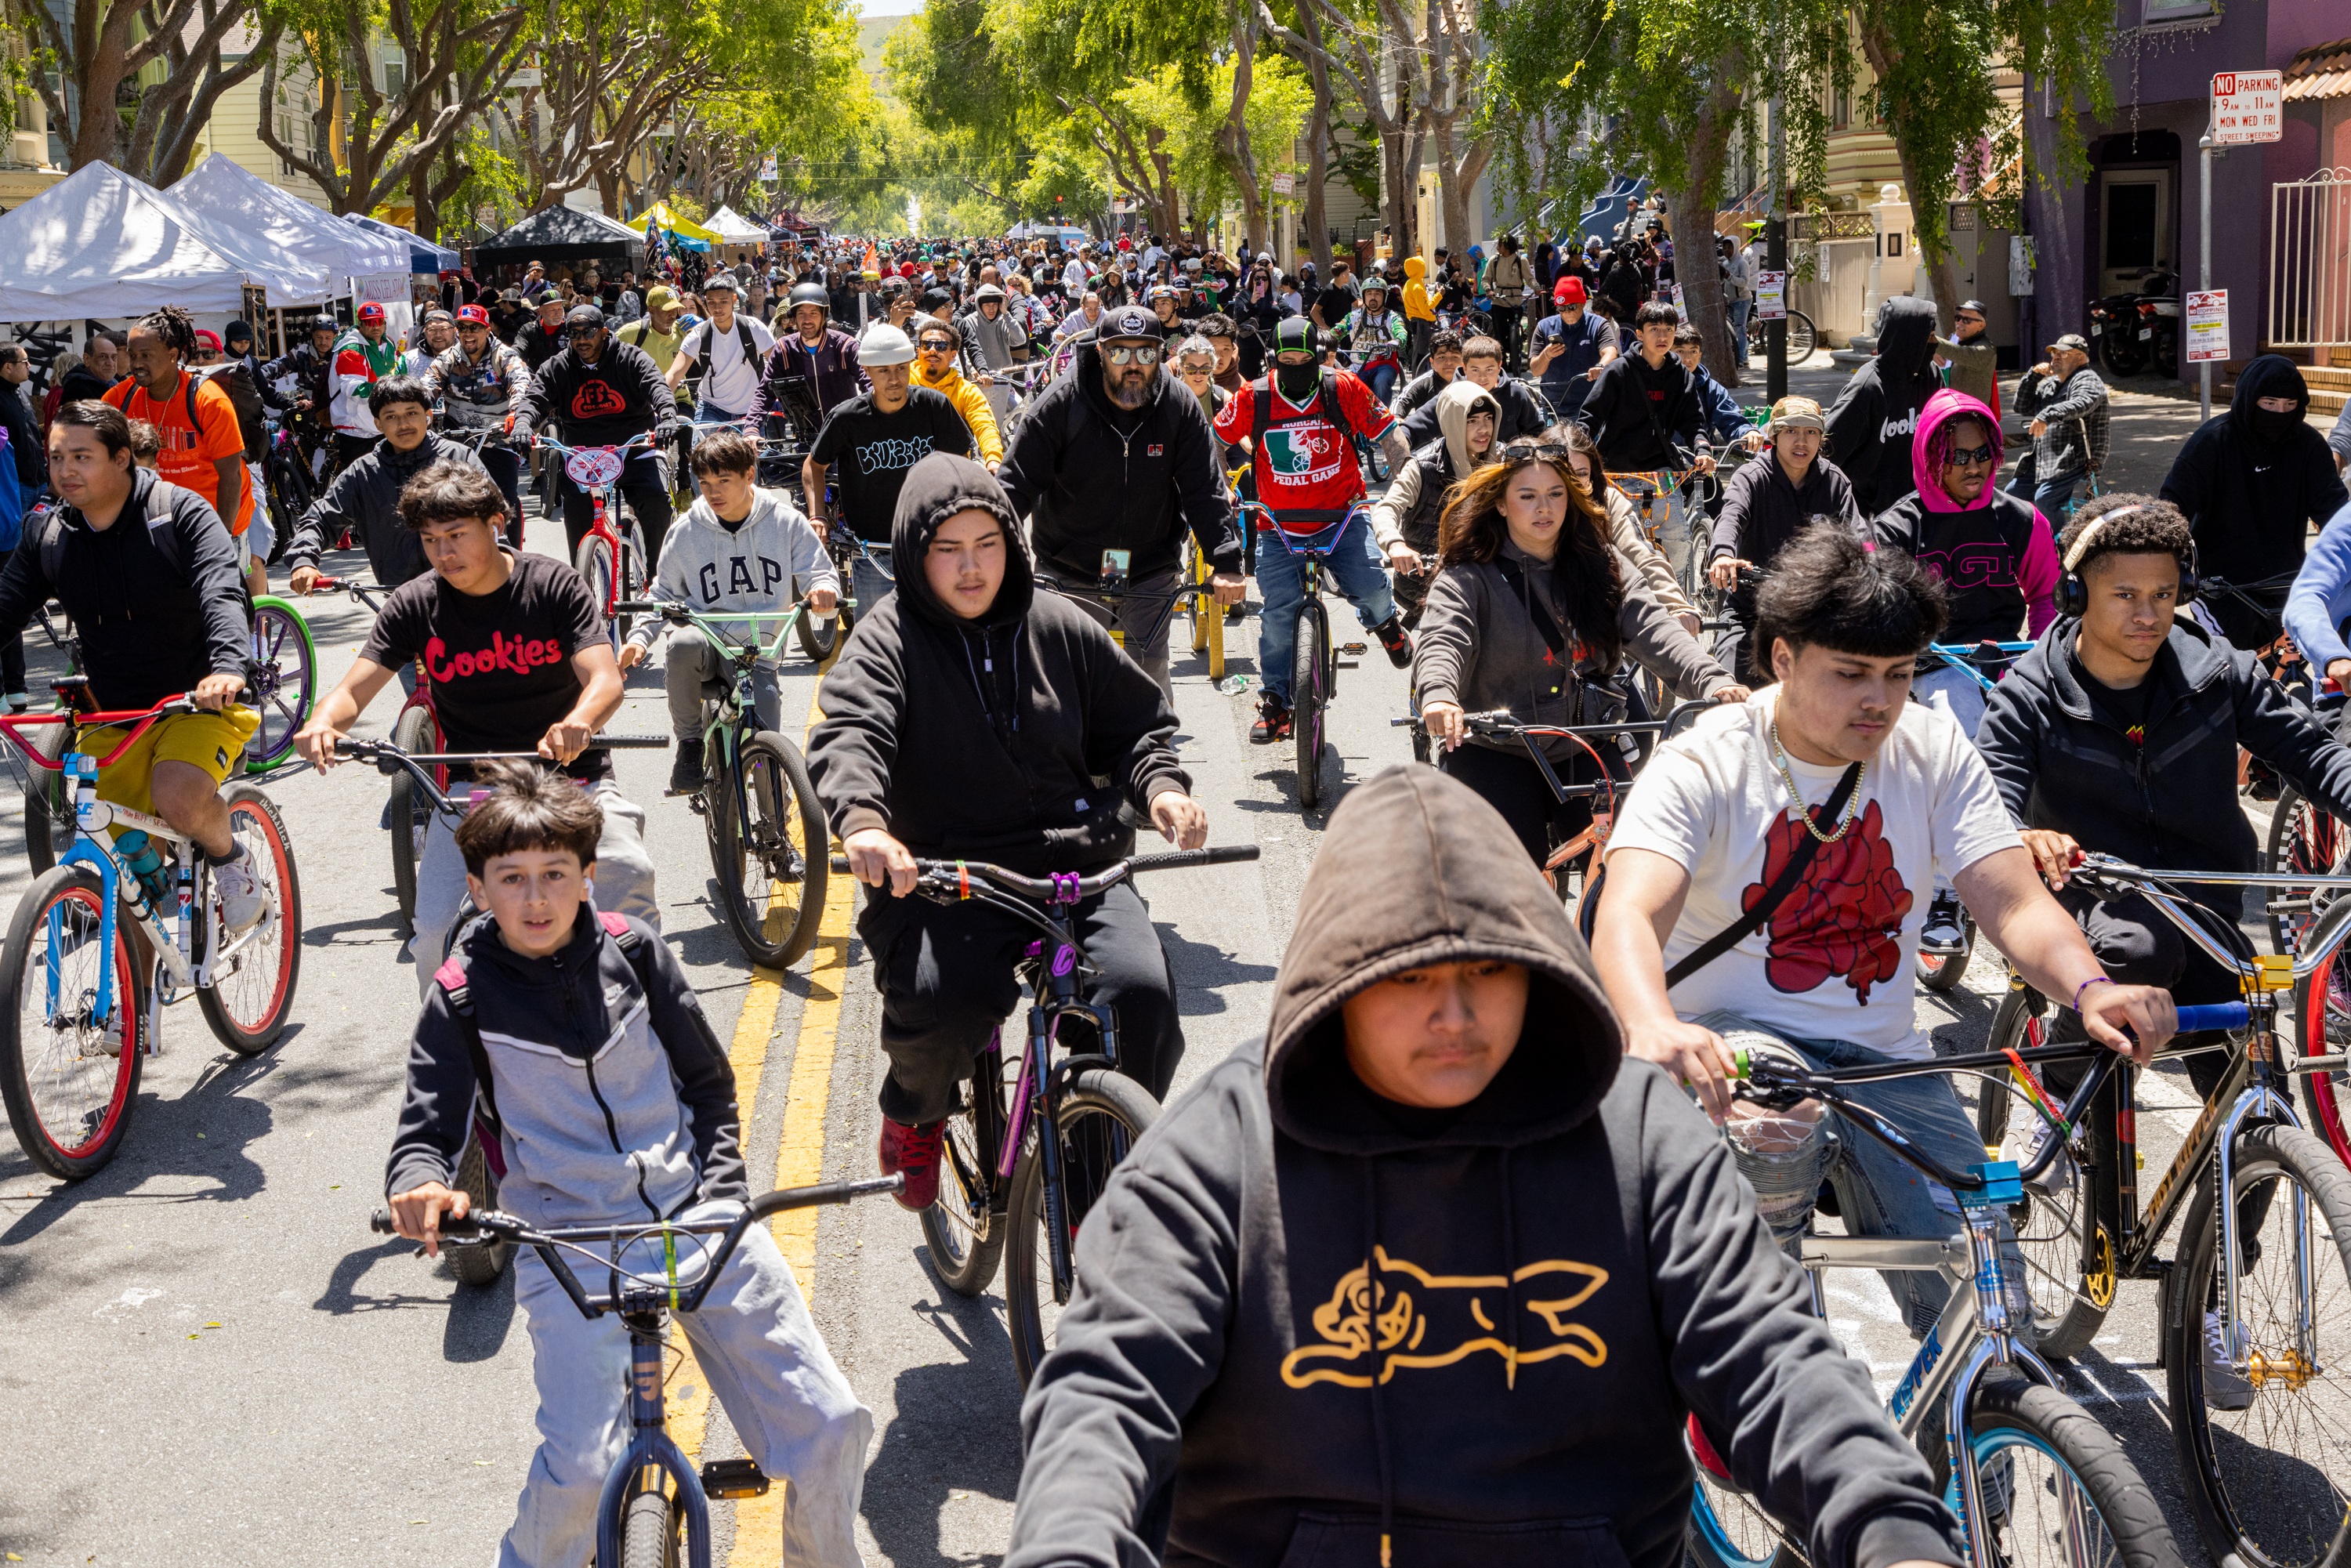 A diverse crowd cycles down a sunny, tree-lined street, creating a dynamic sea of riders and bicycles.